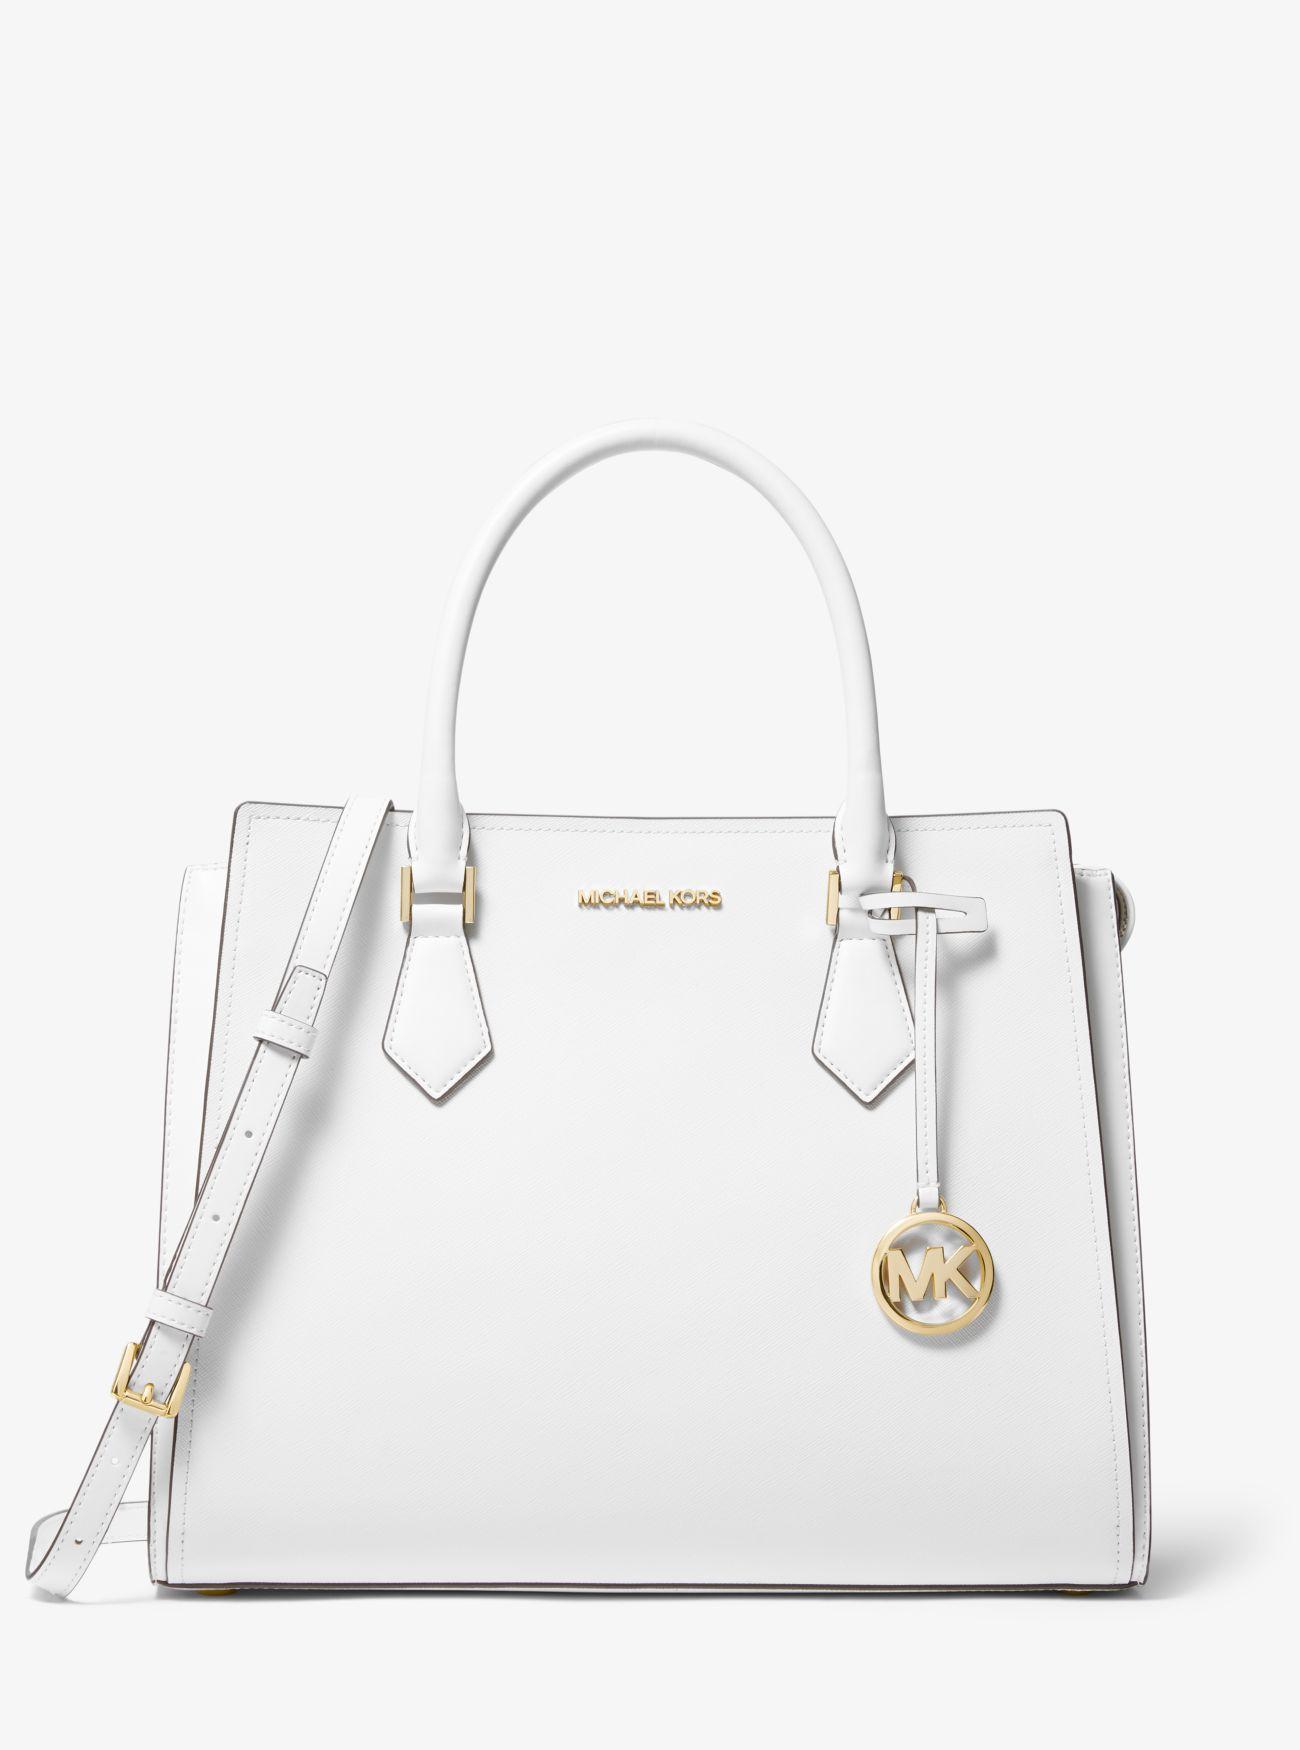 Michael Kors Hope Large Saffiano Leather Satchel in White - Lyst